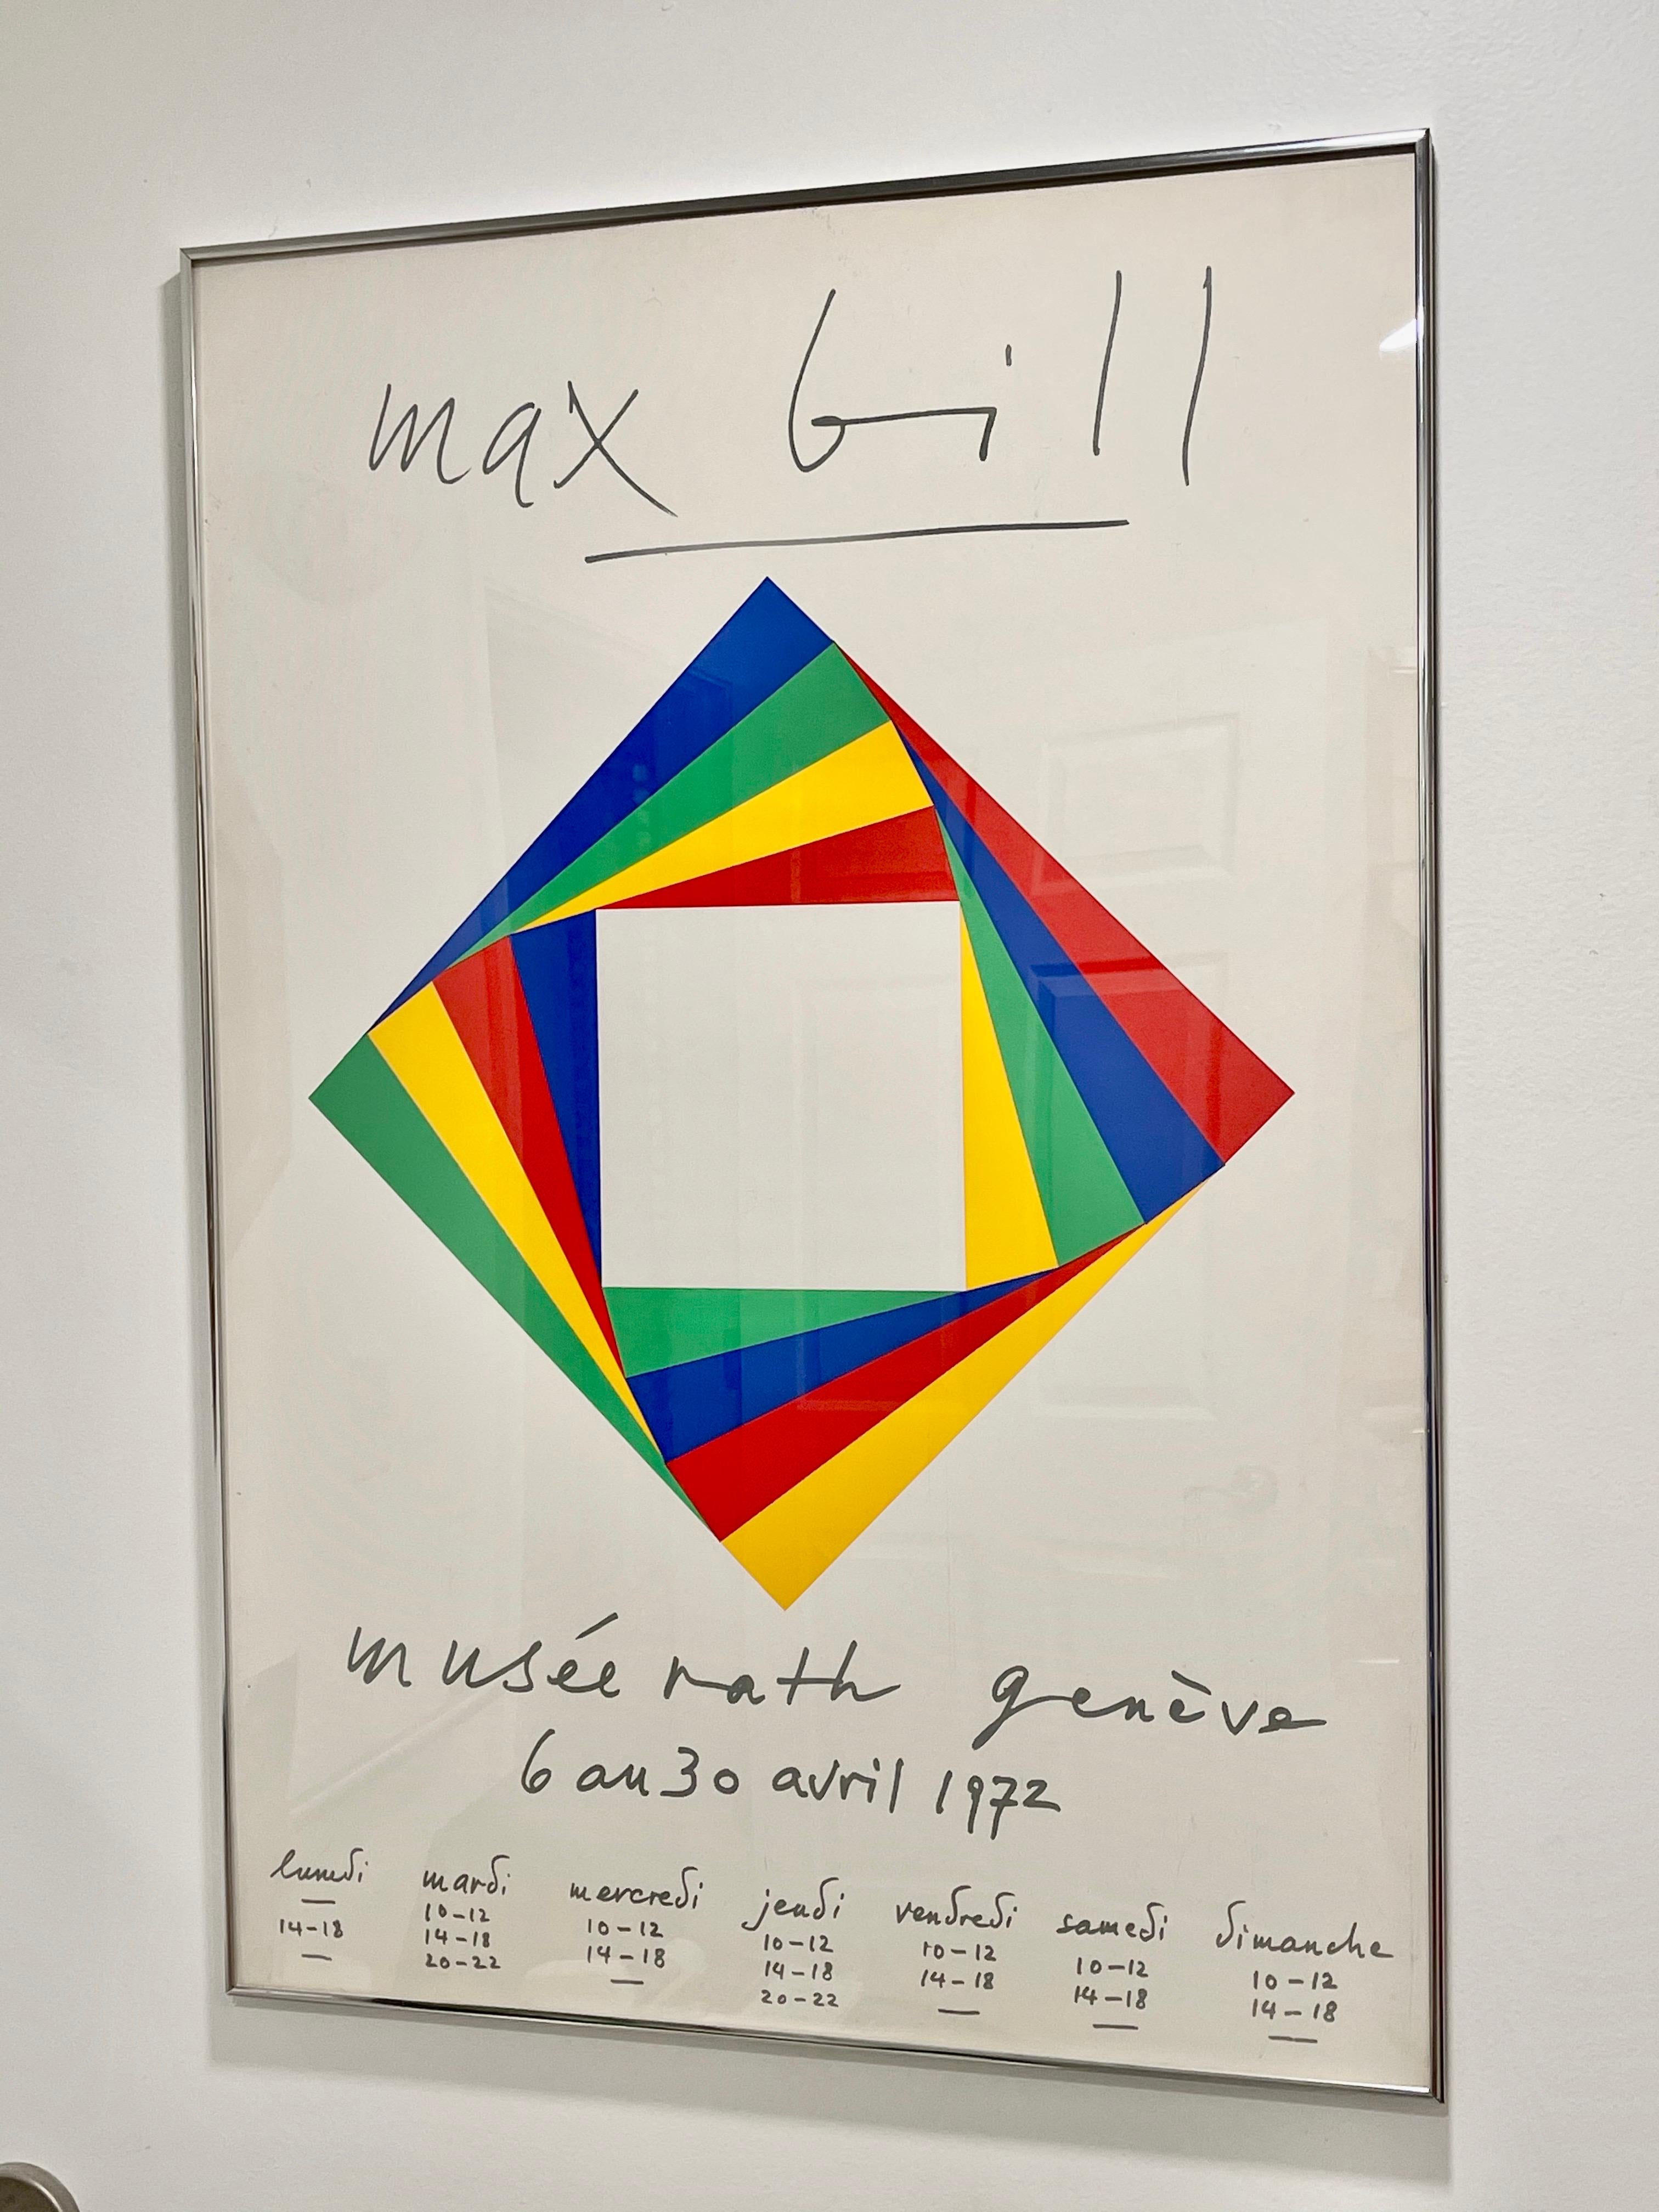 Max Bill Geneve Musee Serigraph, 1972 In Good Condition For Sale In Hanover, MA